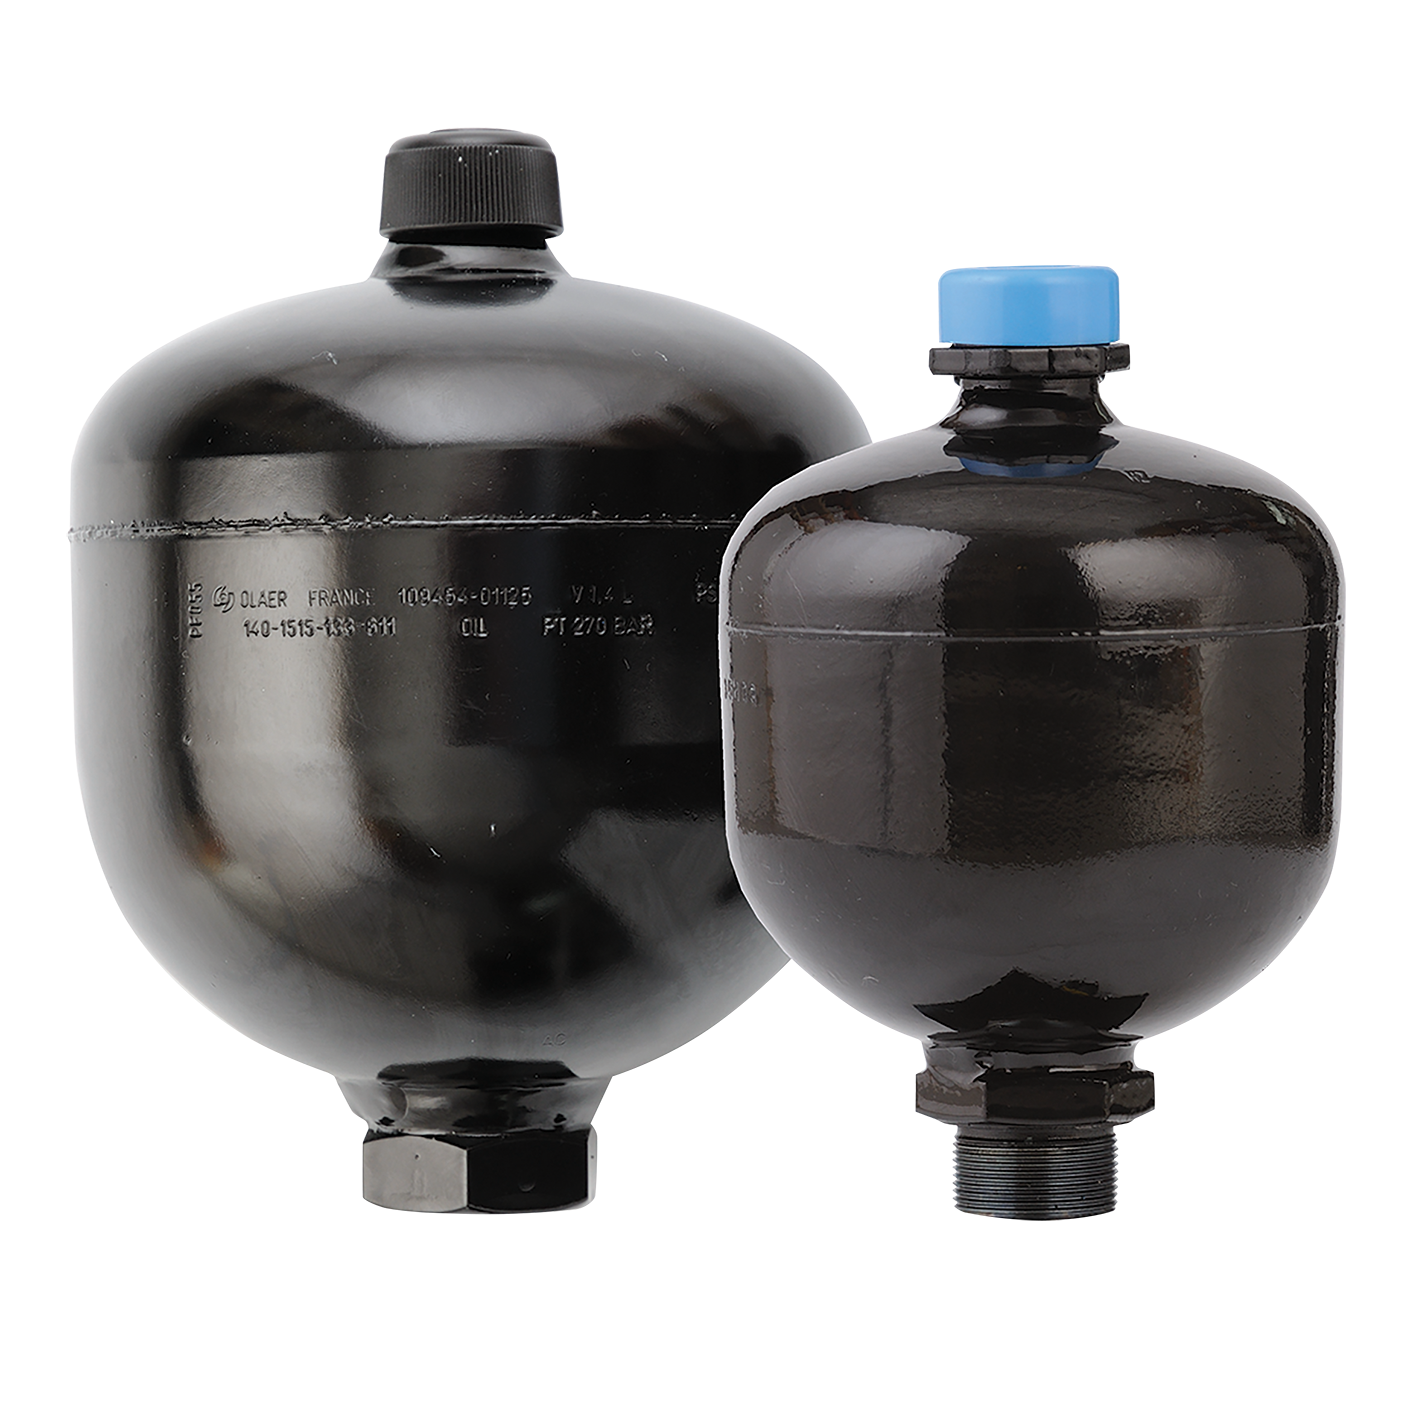 UK's Leading Suppliers of FCH DIAPHRAGM ACCUM 3.5 LITRES G3/4